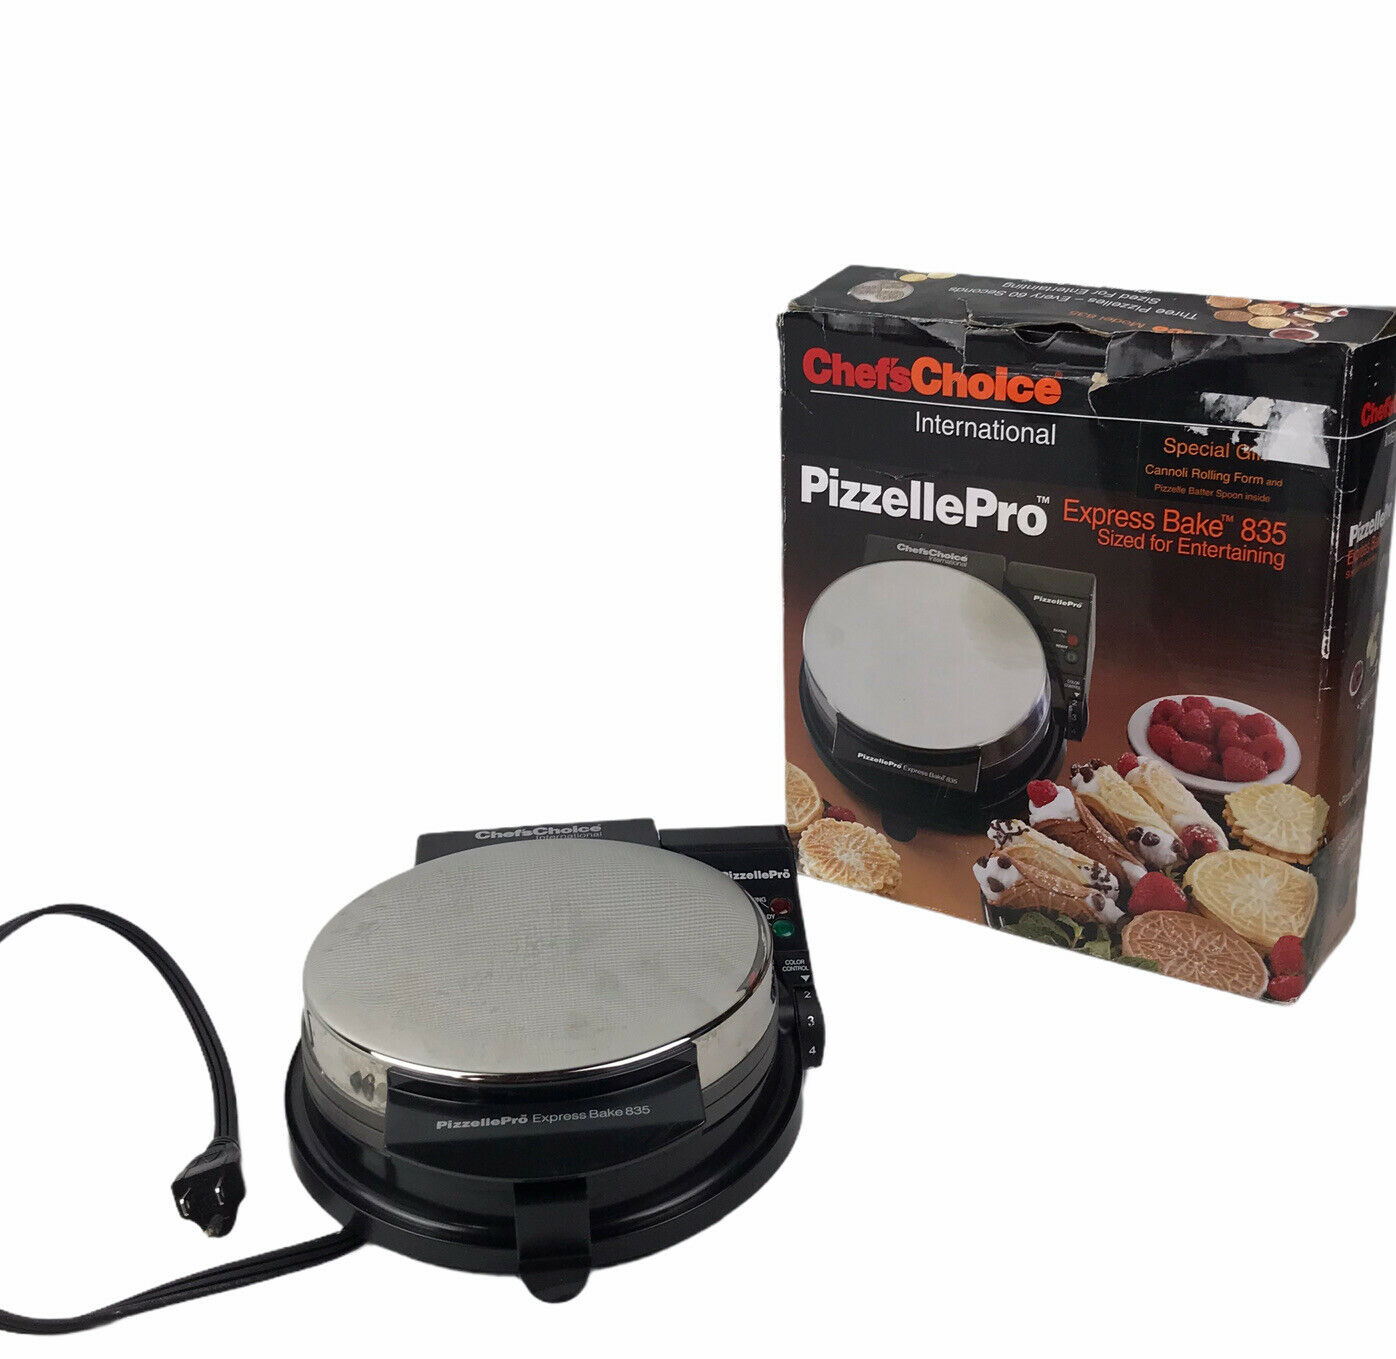 Chefs Choice Pizzelle Pro Express Bake 835 Cannoli Italian Waffle Cookie Maker